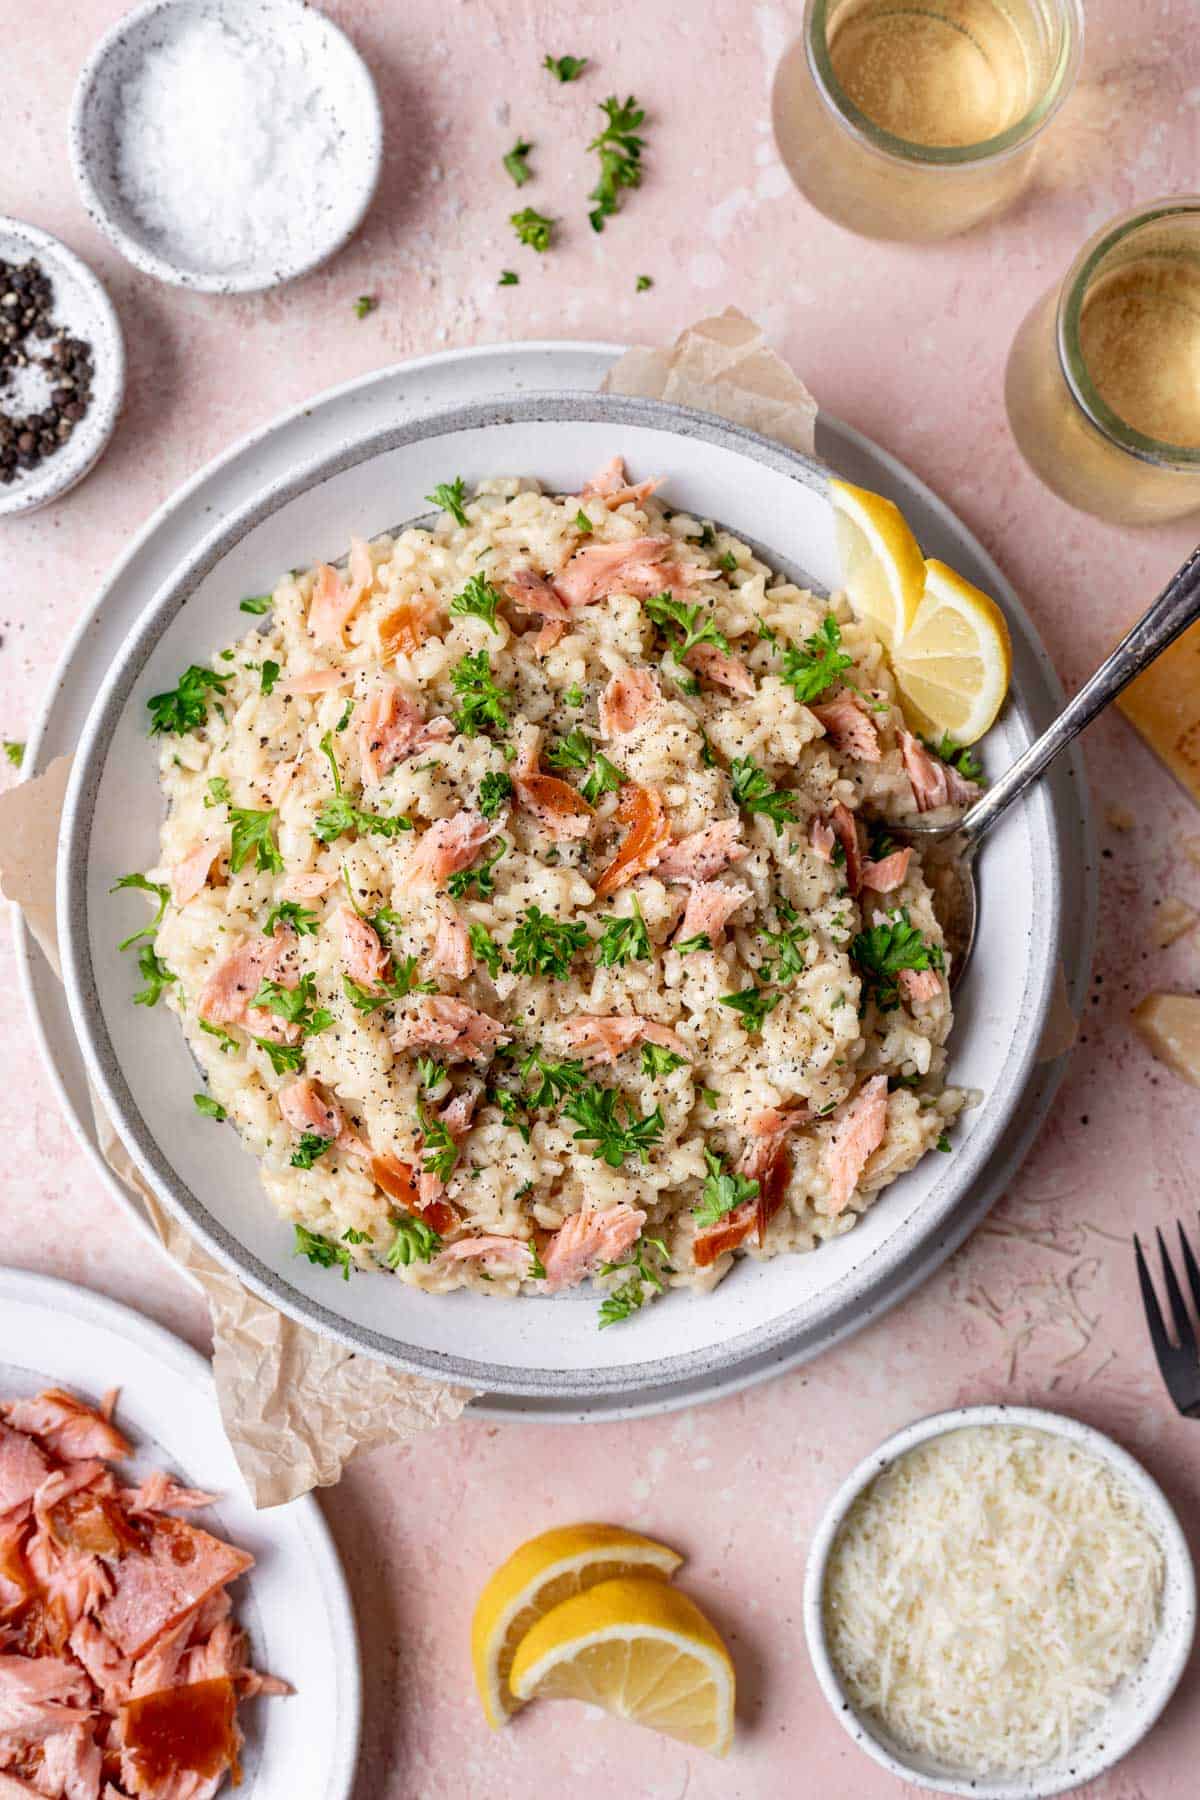 A large bowl of smoked salmon risotto garnished with lemon and parsley.